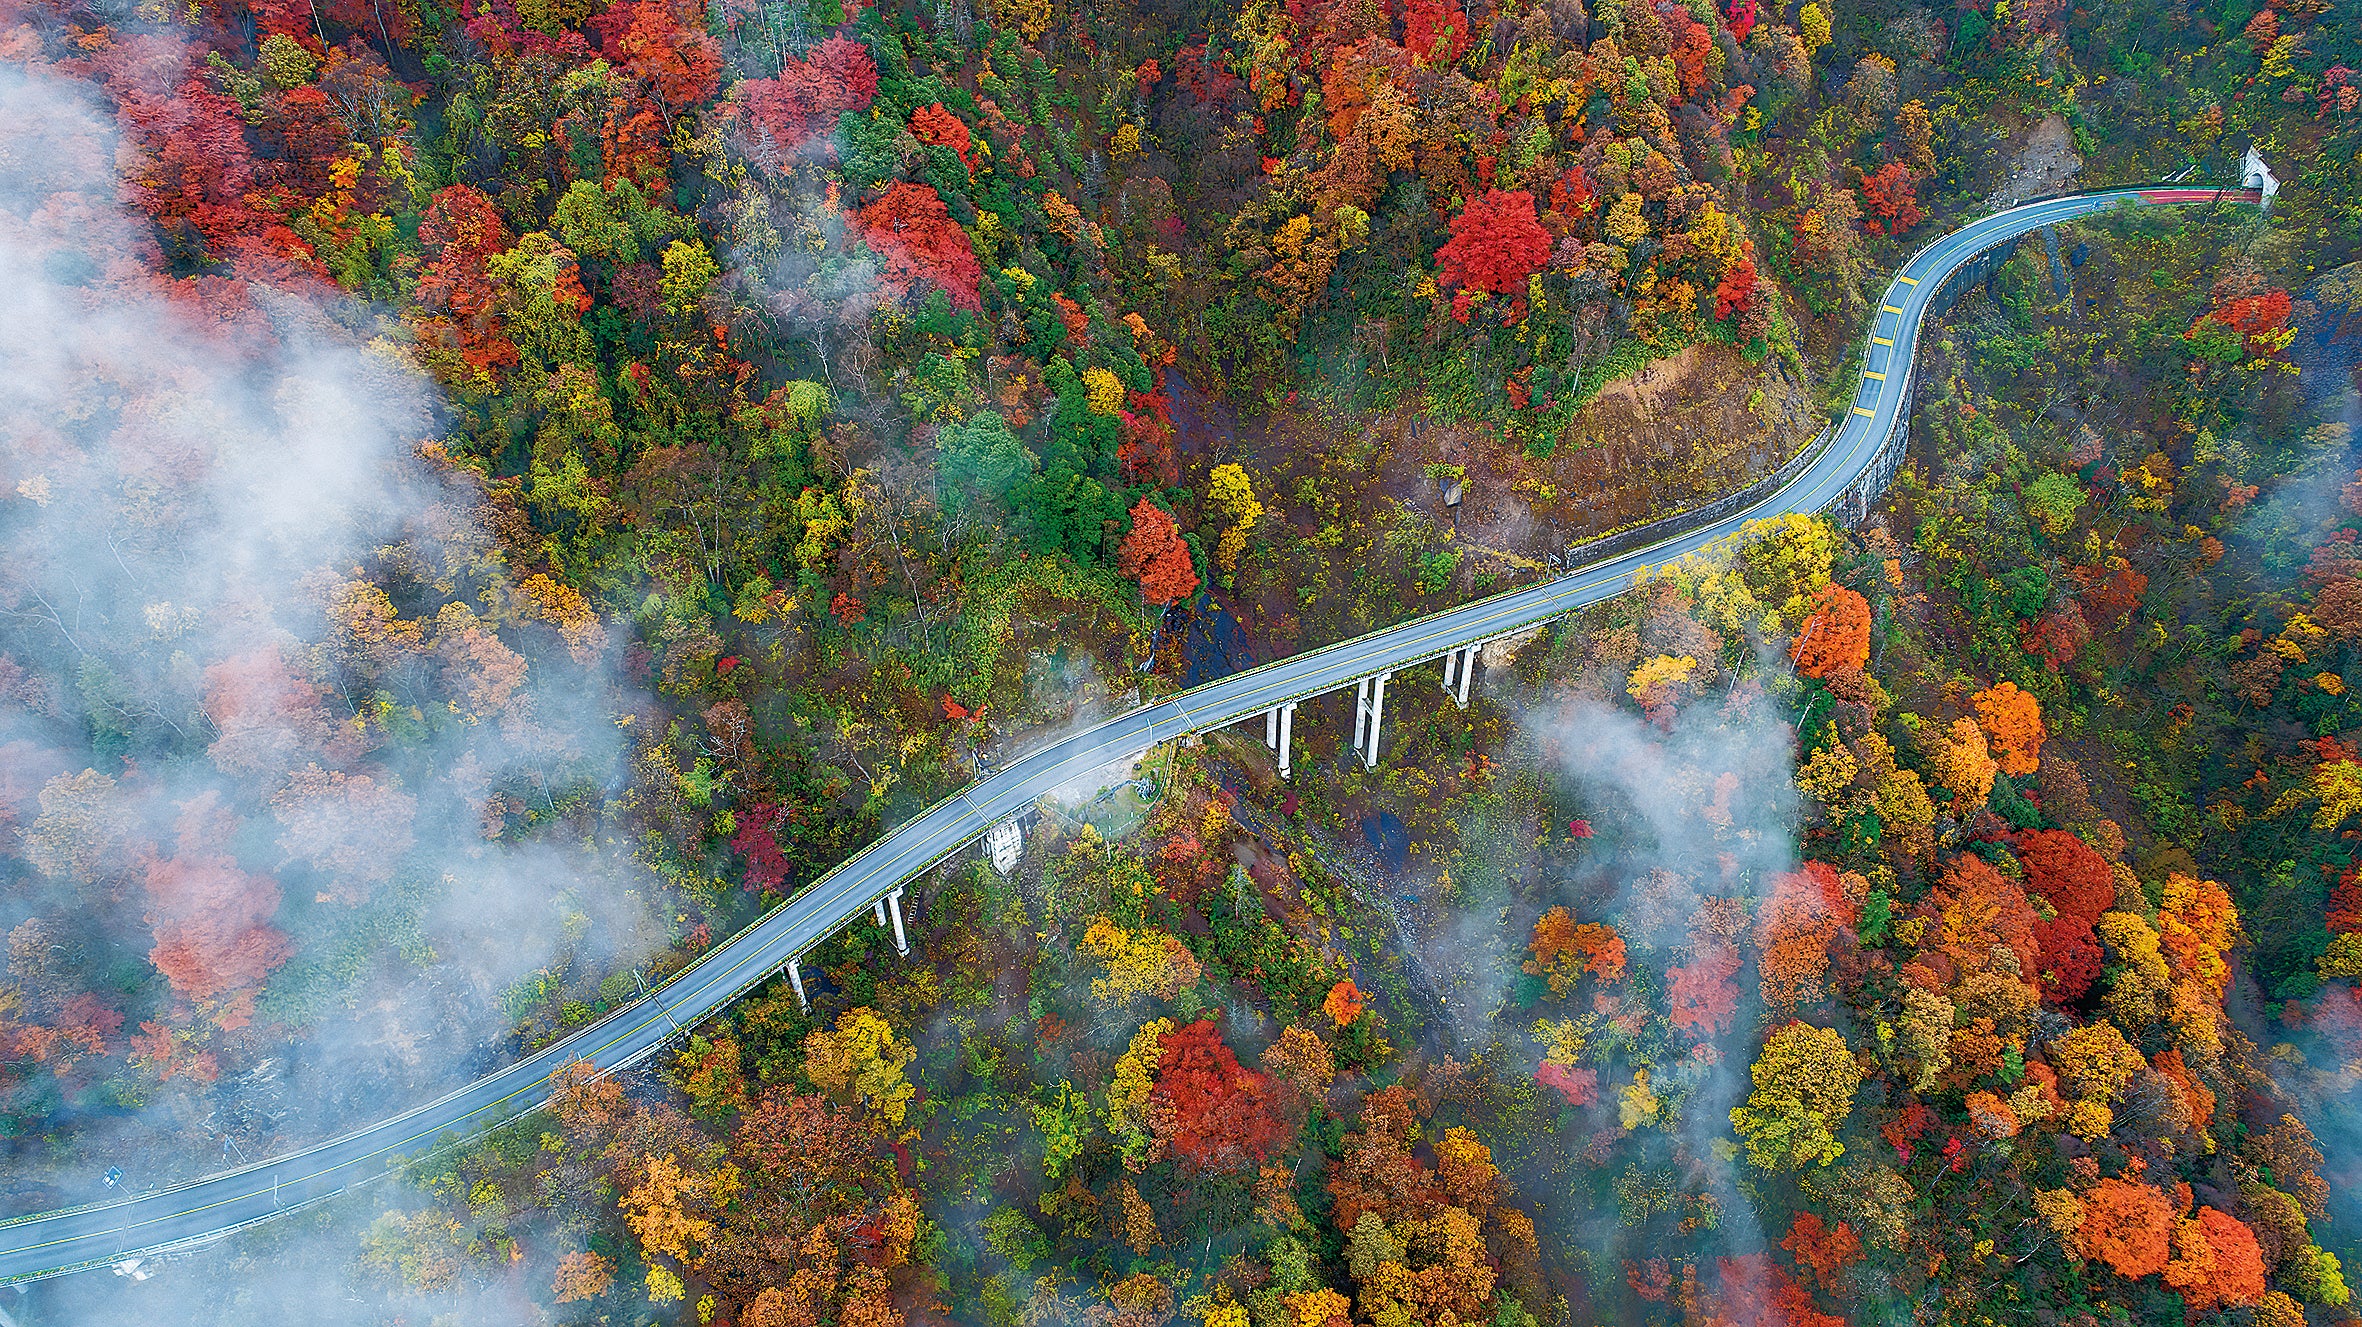 Shennongjia is known for its stunning view of a sea of clouds and its colourful autumn leaves